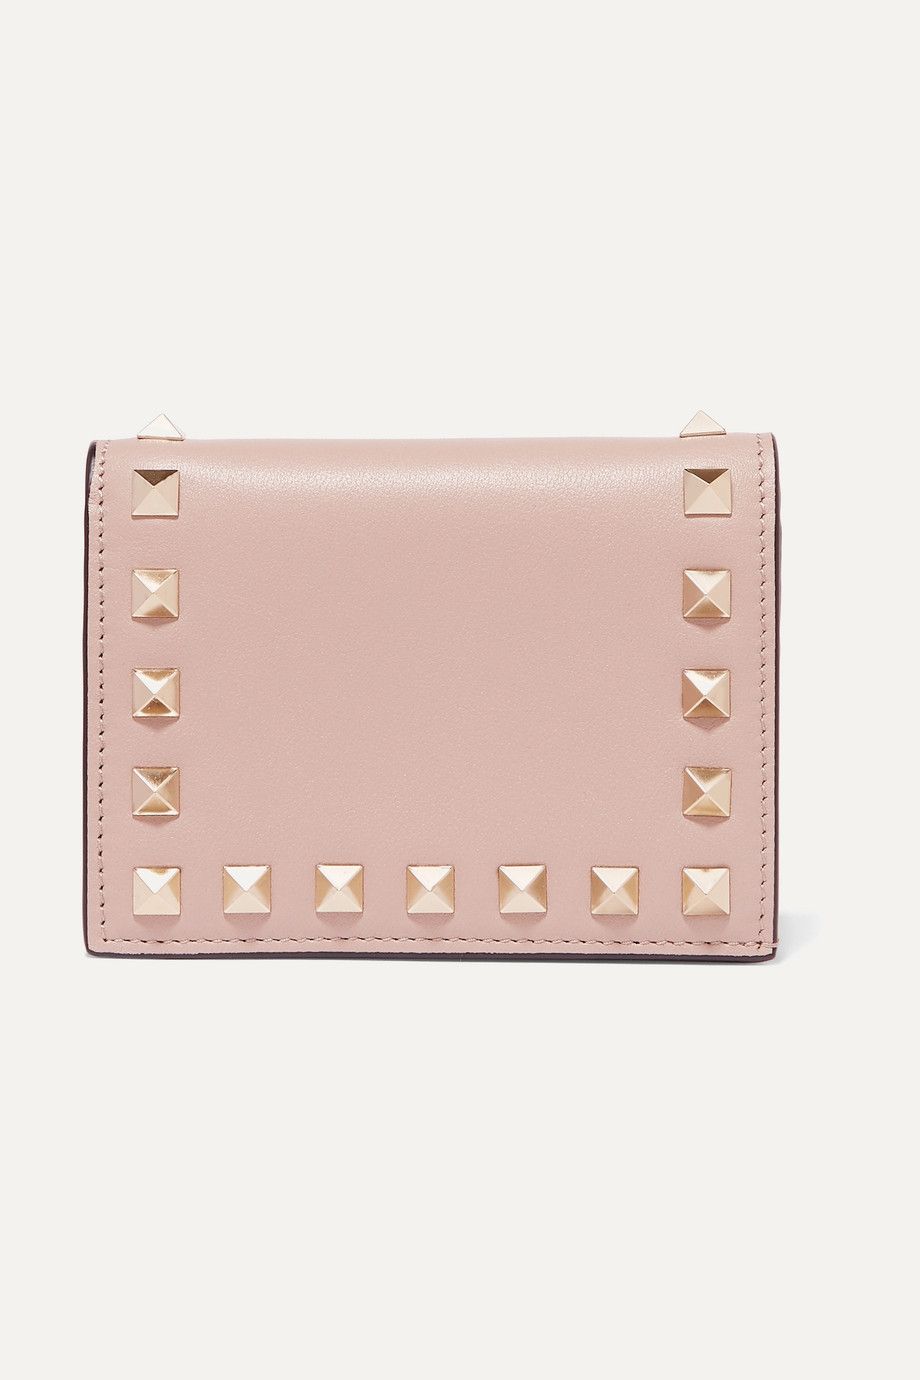 The Rockstud Leather Wallet